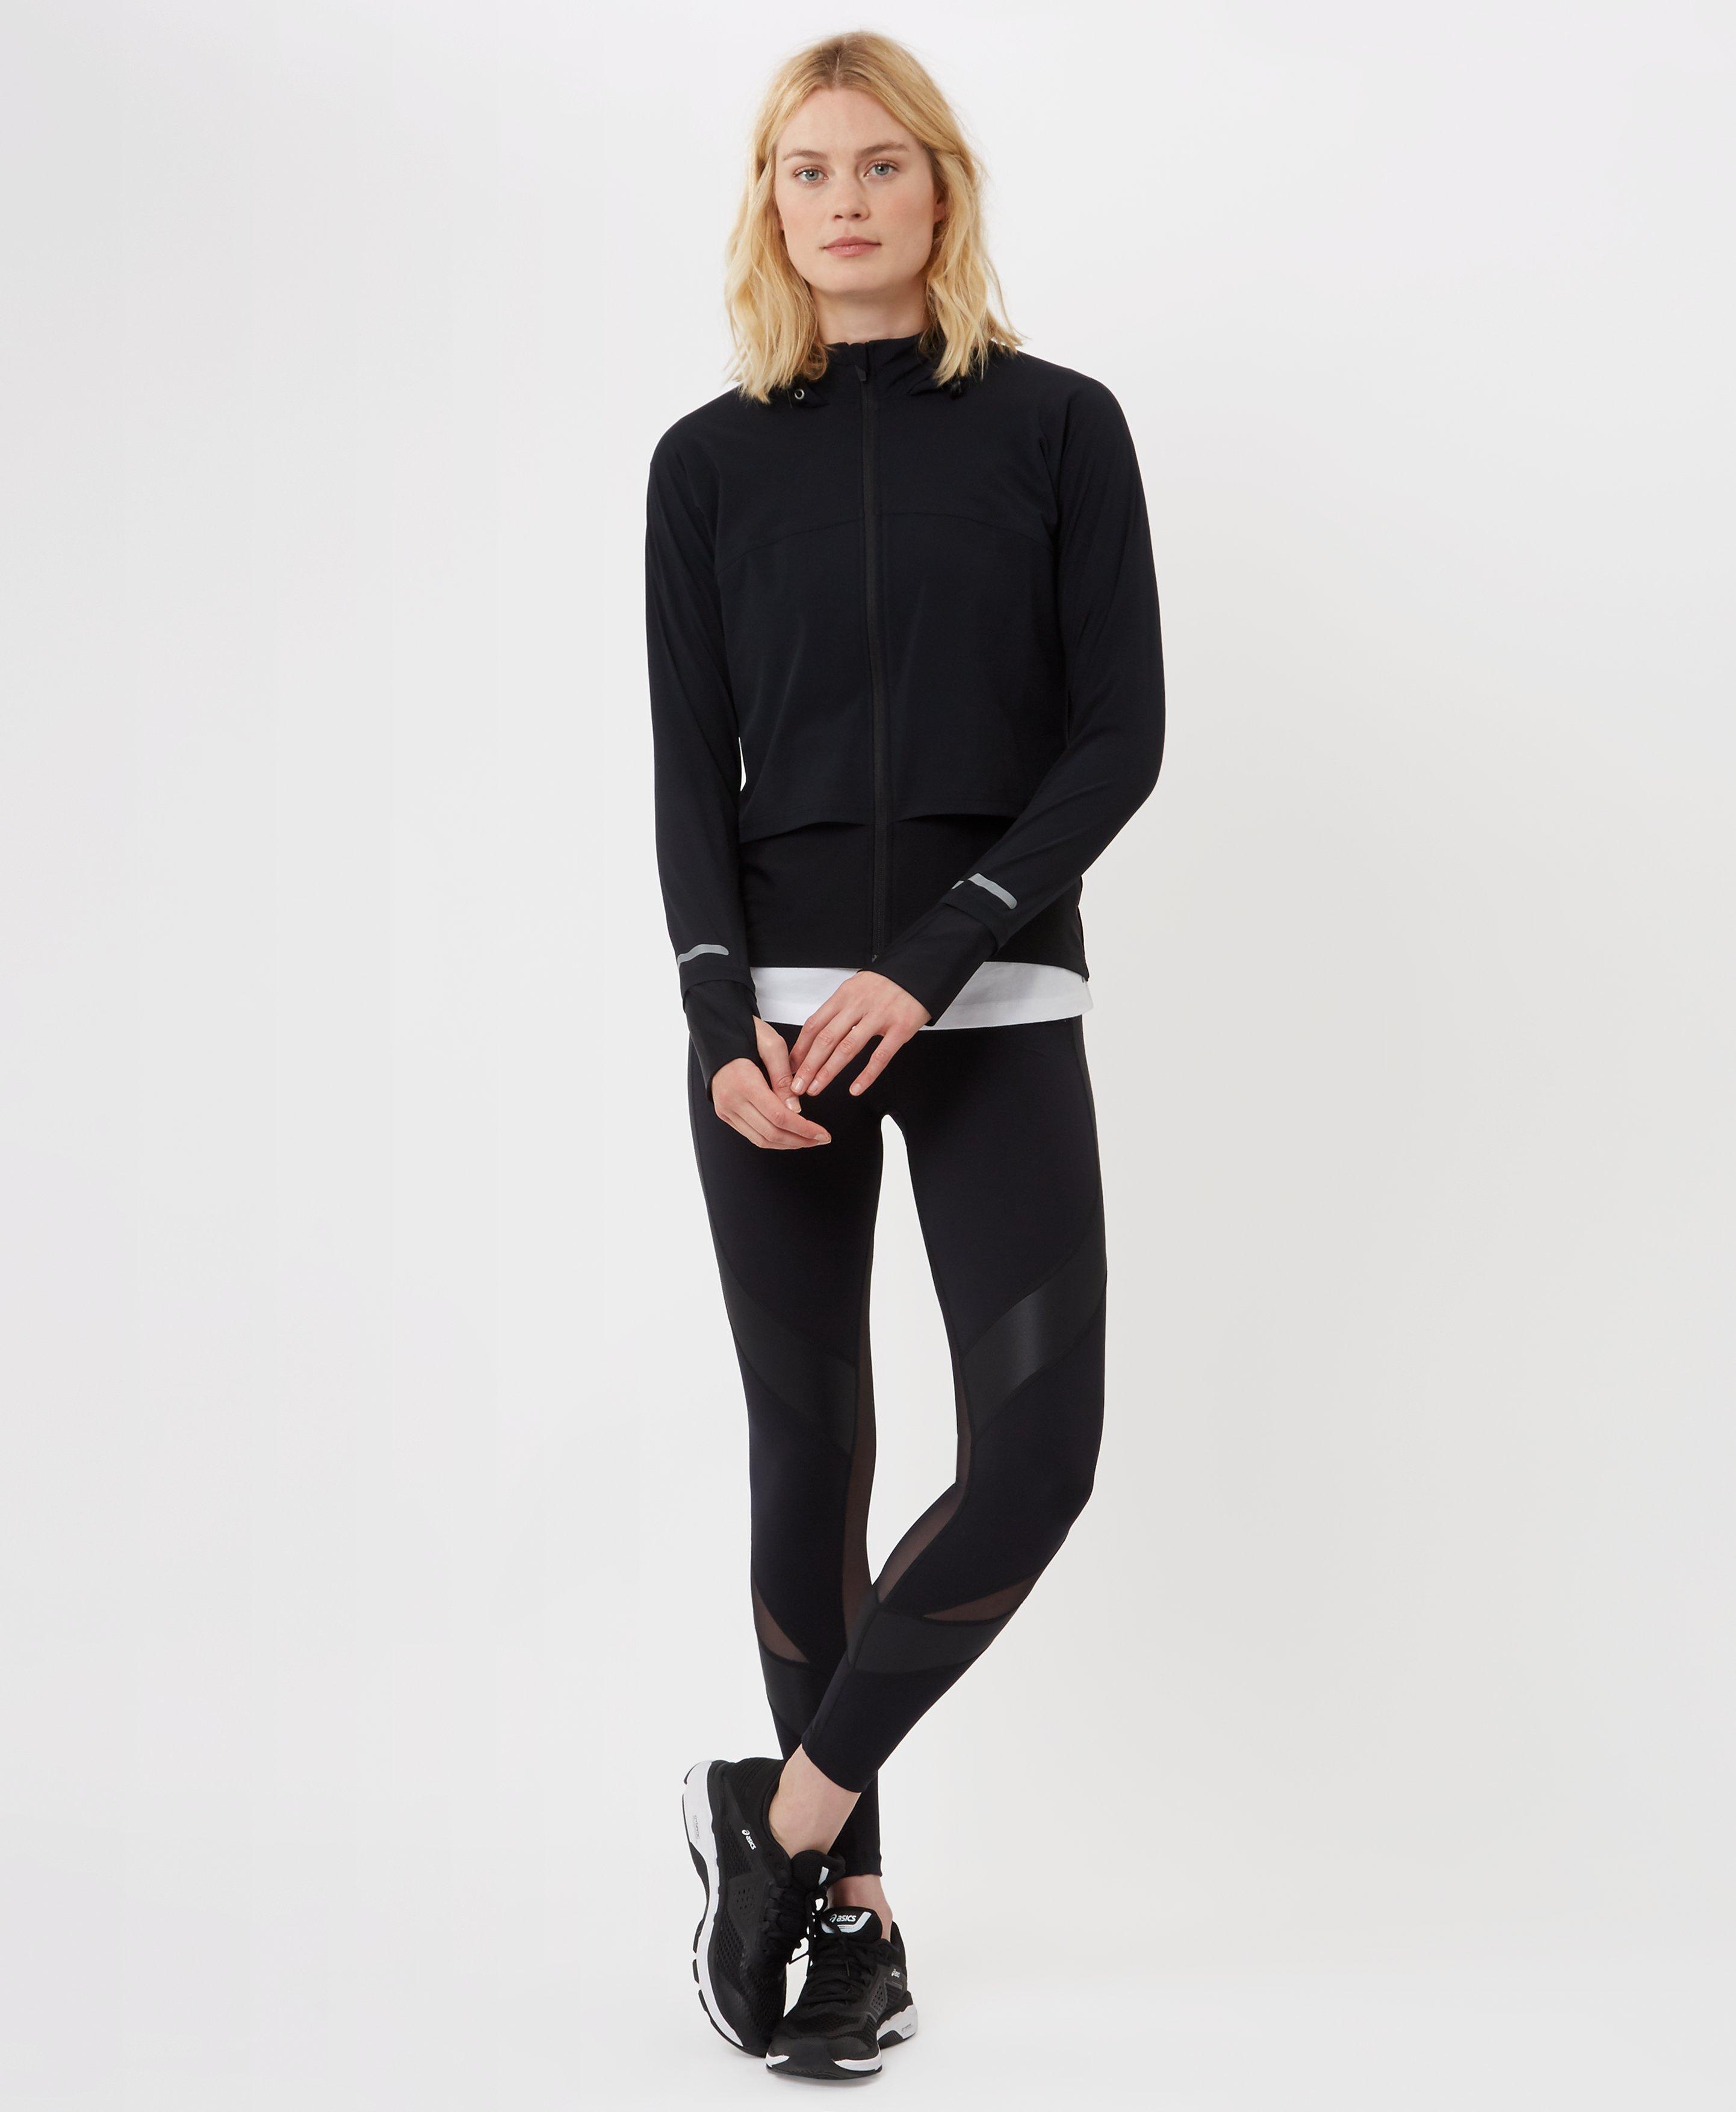 Sweaty Betty Synthetic Fast Track Running Jacket in Black - Lyst